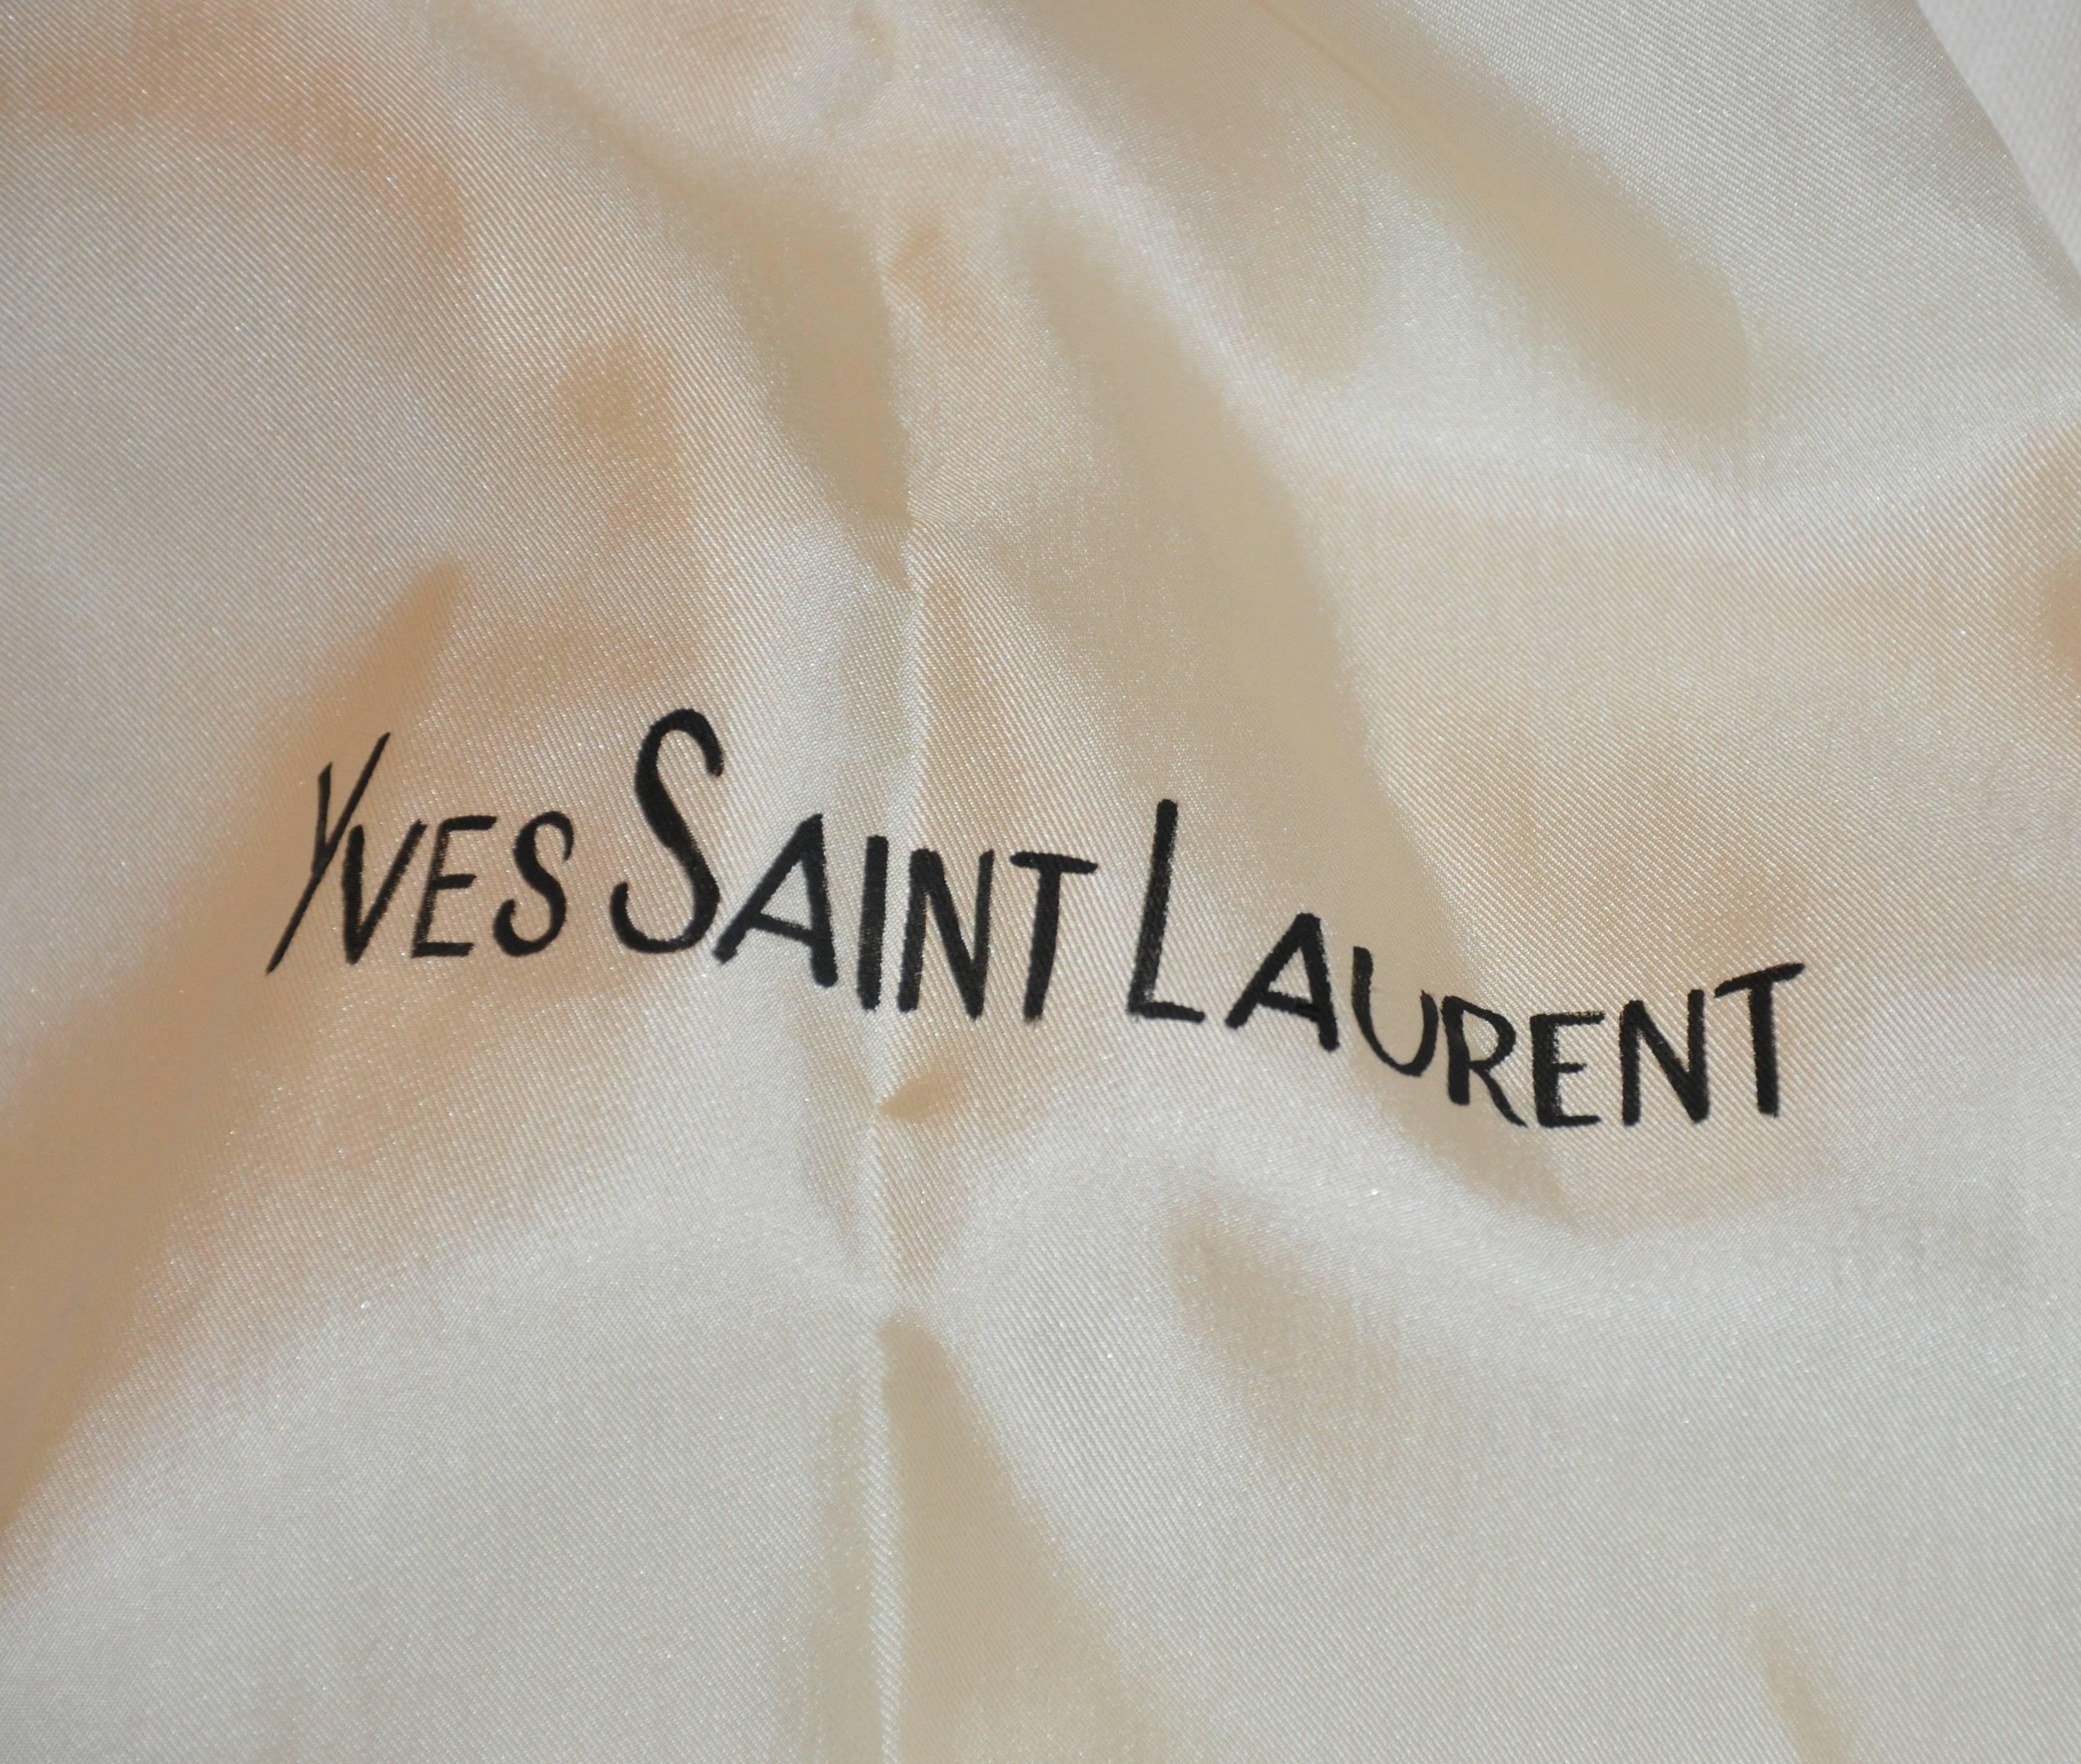    This wonderfully elegant and rare Yves saint Laurent ivory jacquard silk hand-tucked turban is accented with a extended train finished with fringed edges. His signature name is hand-painted along the train. The interior is accented with a